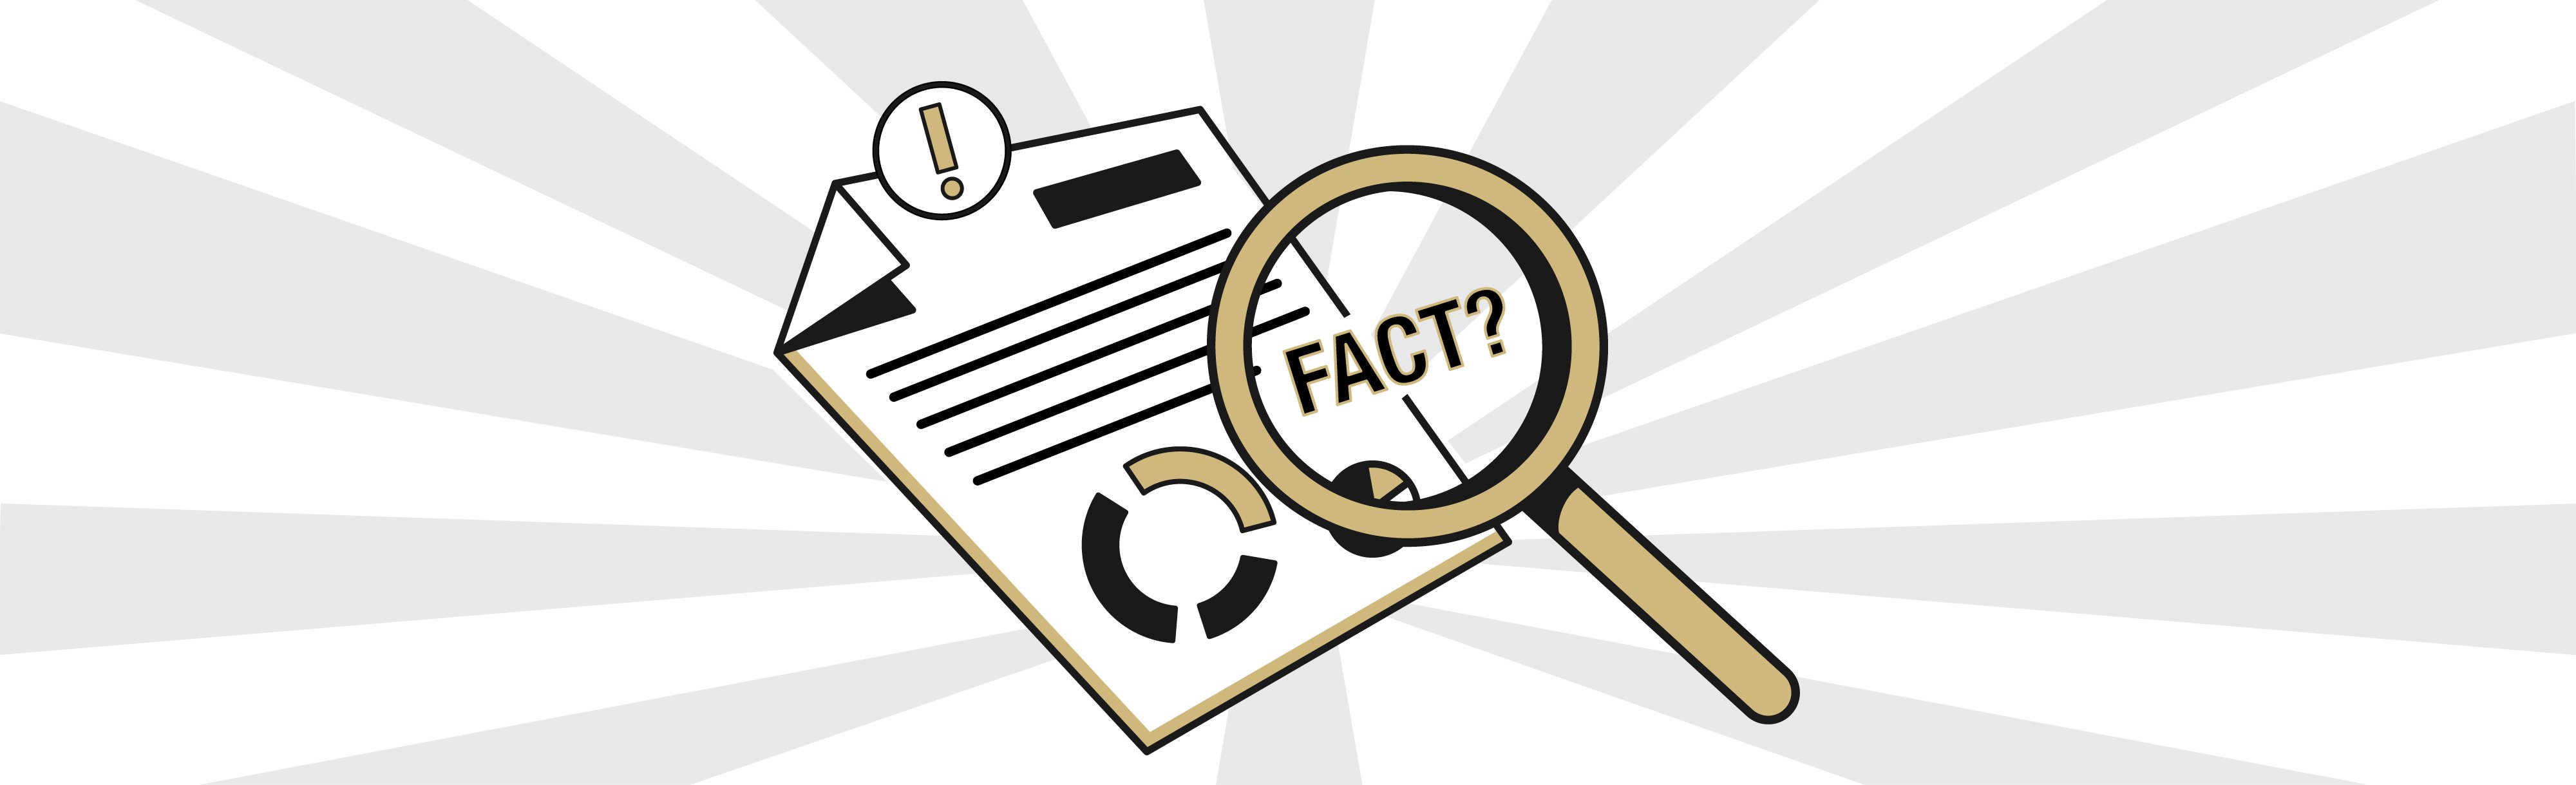 graphic of a magnifying glass focused on the word "fact" over a research paper